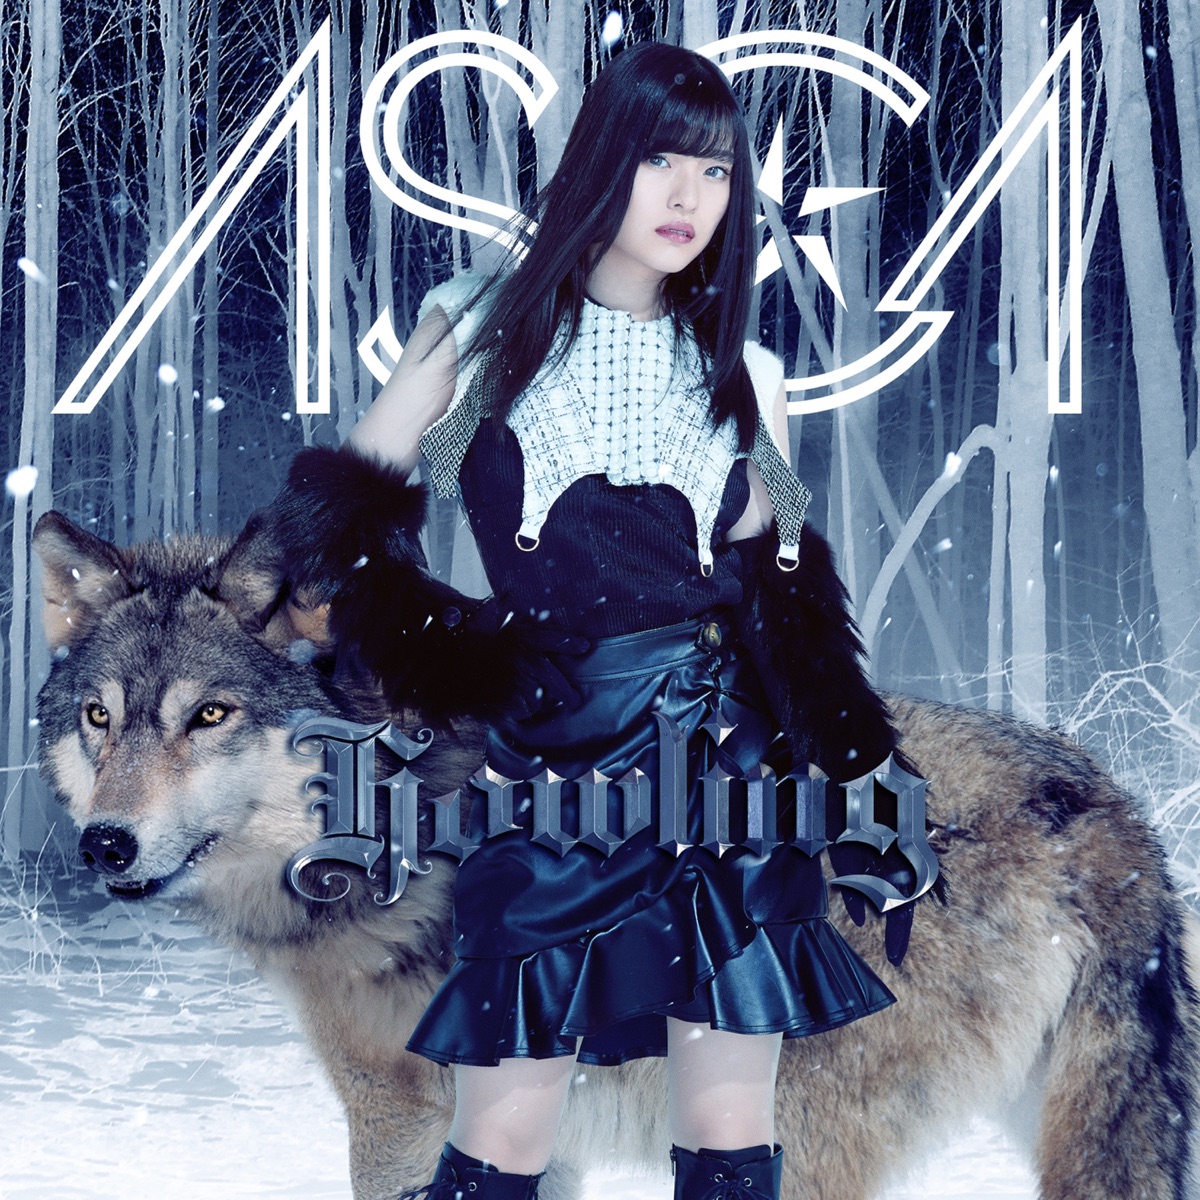 『ASCA - grilletto』収録の『Howling』ジャケット